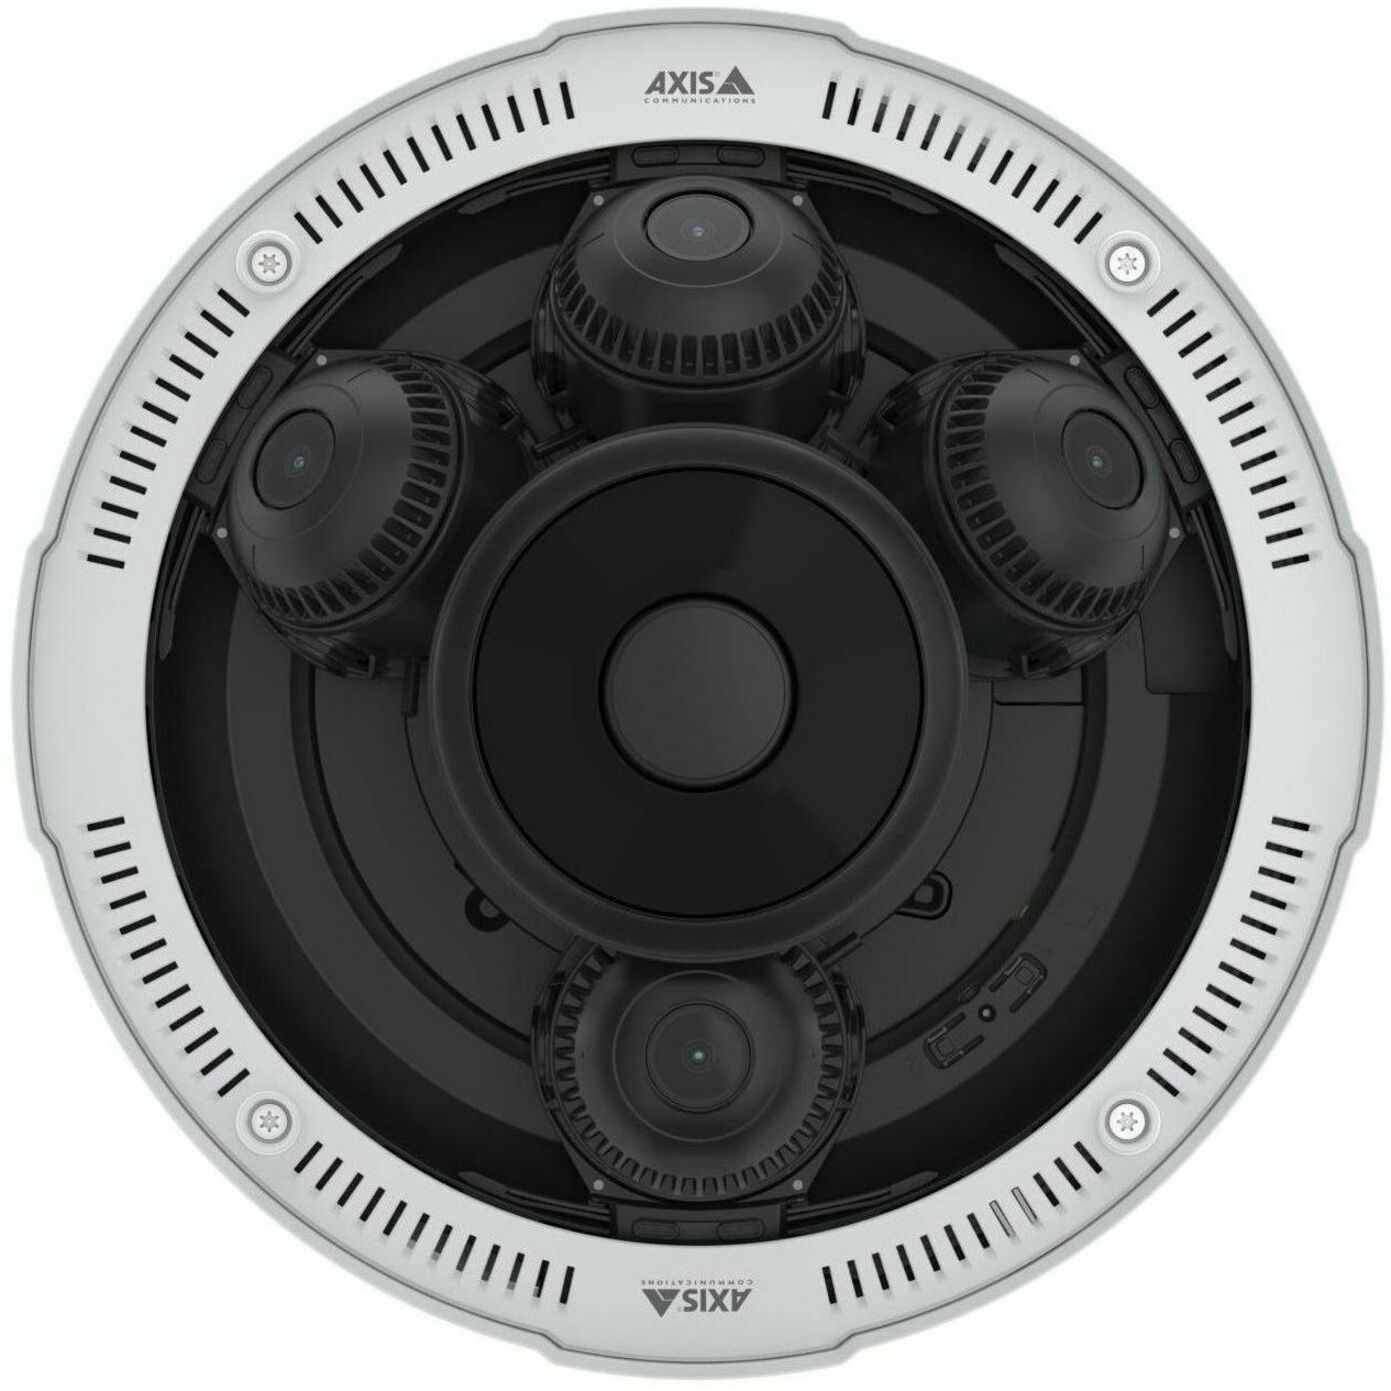 AXIS 02635-001 P3738-PLE Panoramic Camera 4x 4K Multidirectional With Deep Learning, Varifocal Lens, 2.5x Optical Zoom, Memory Card/Cloud Storage, Outdoor, IK09 Impact Protection, IP66/IP67 Ingress Protection